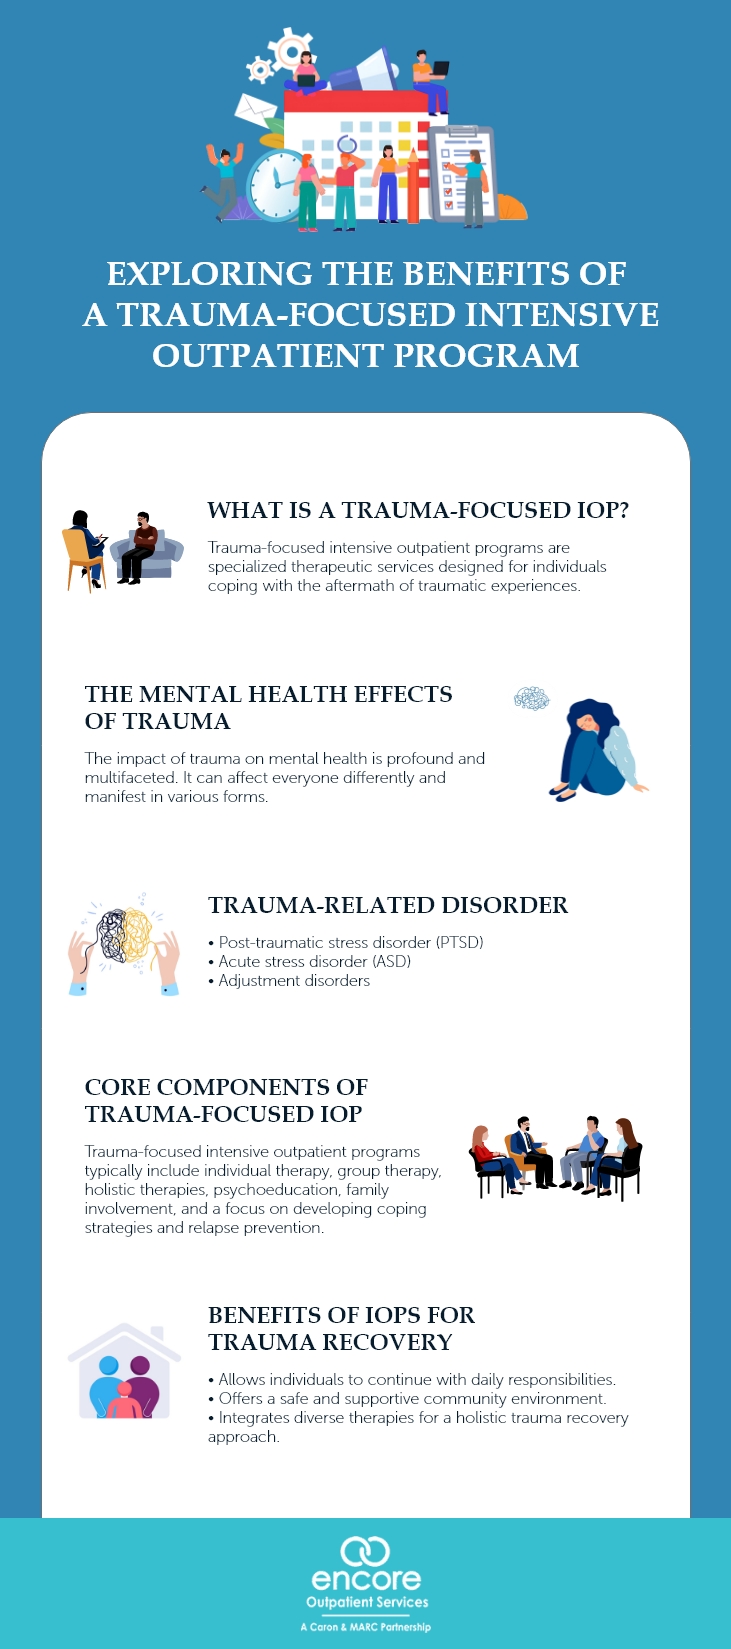  Exploring the Benefits of a Trauma-Focused Intensive Outpatient Program
